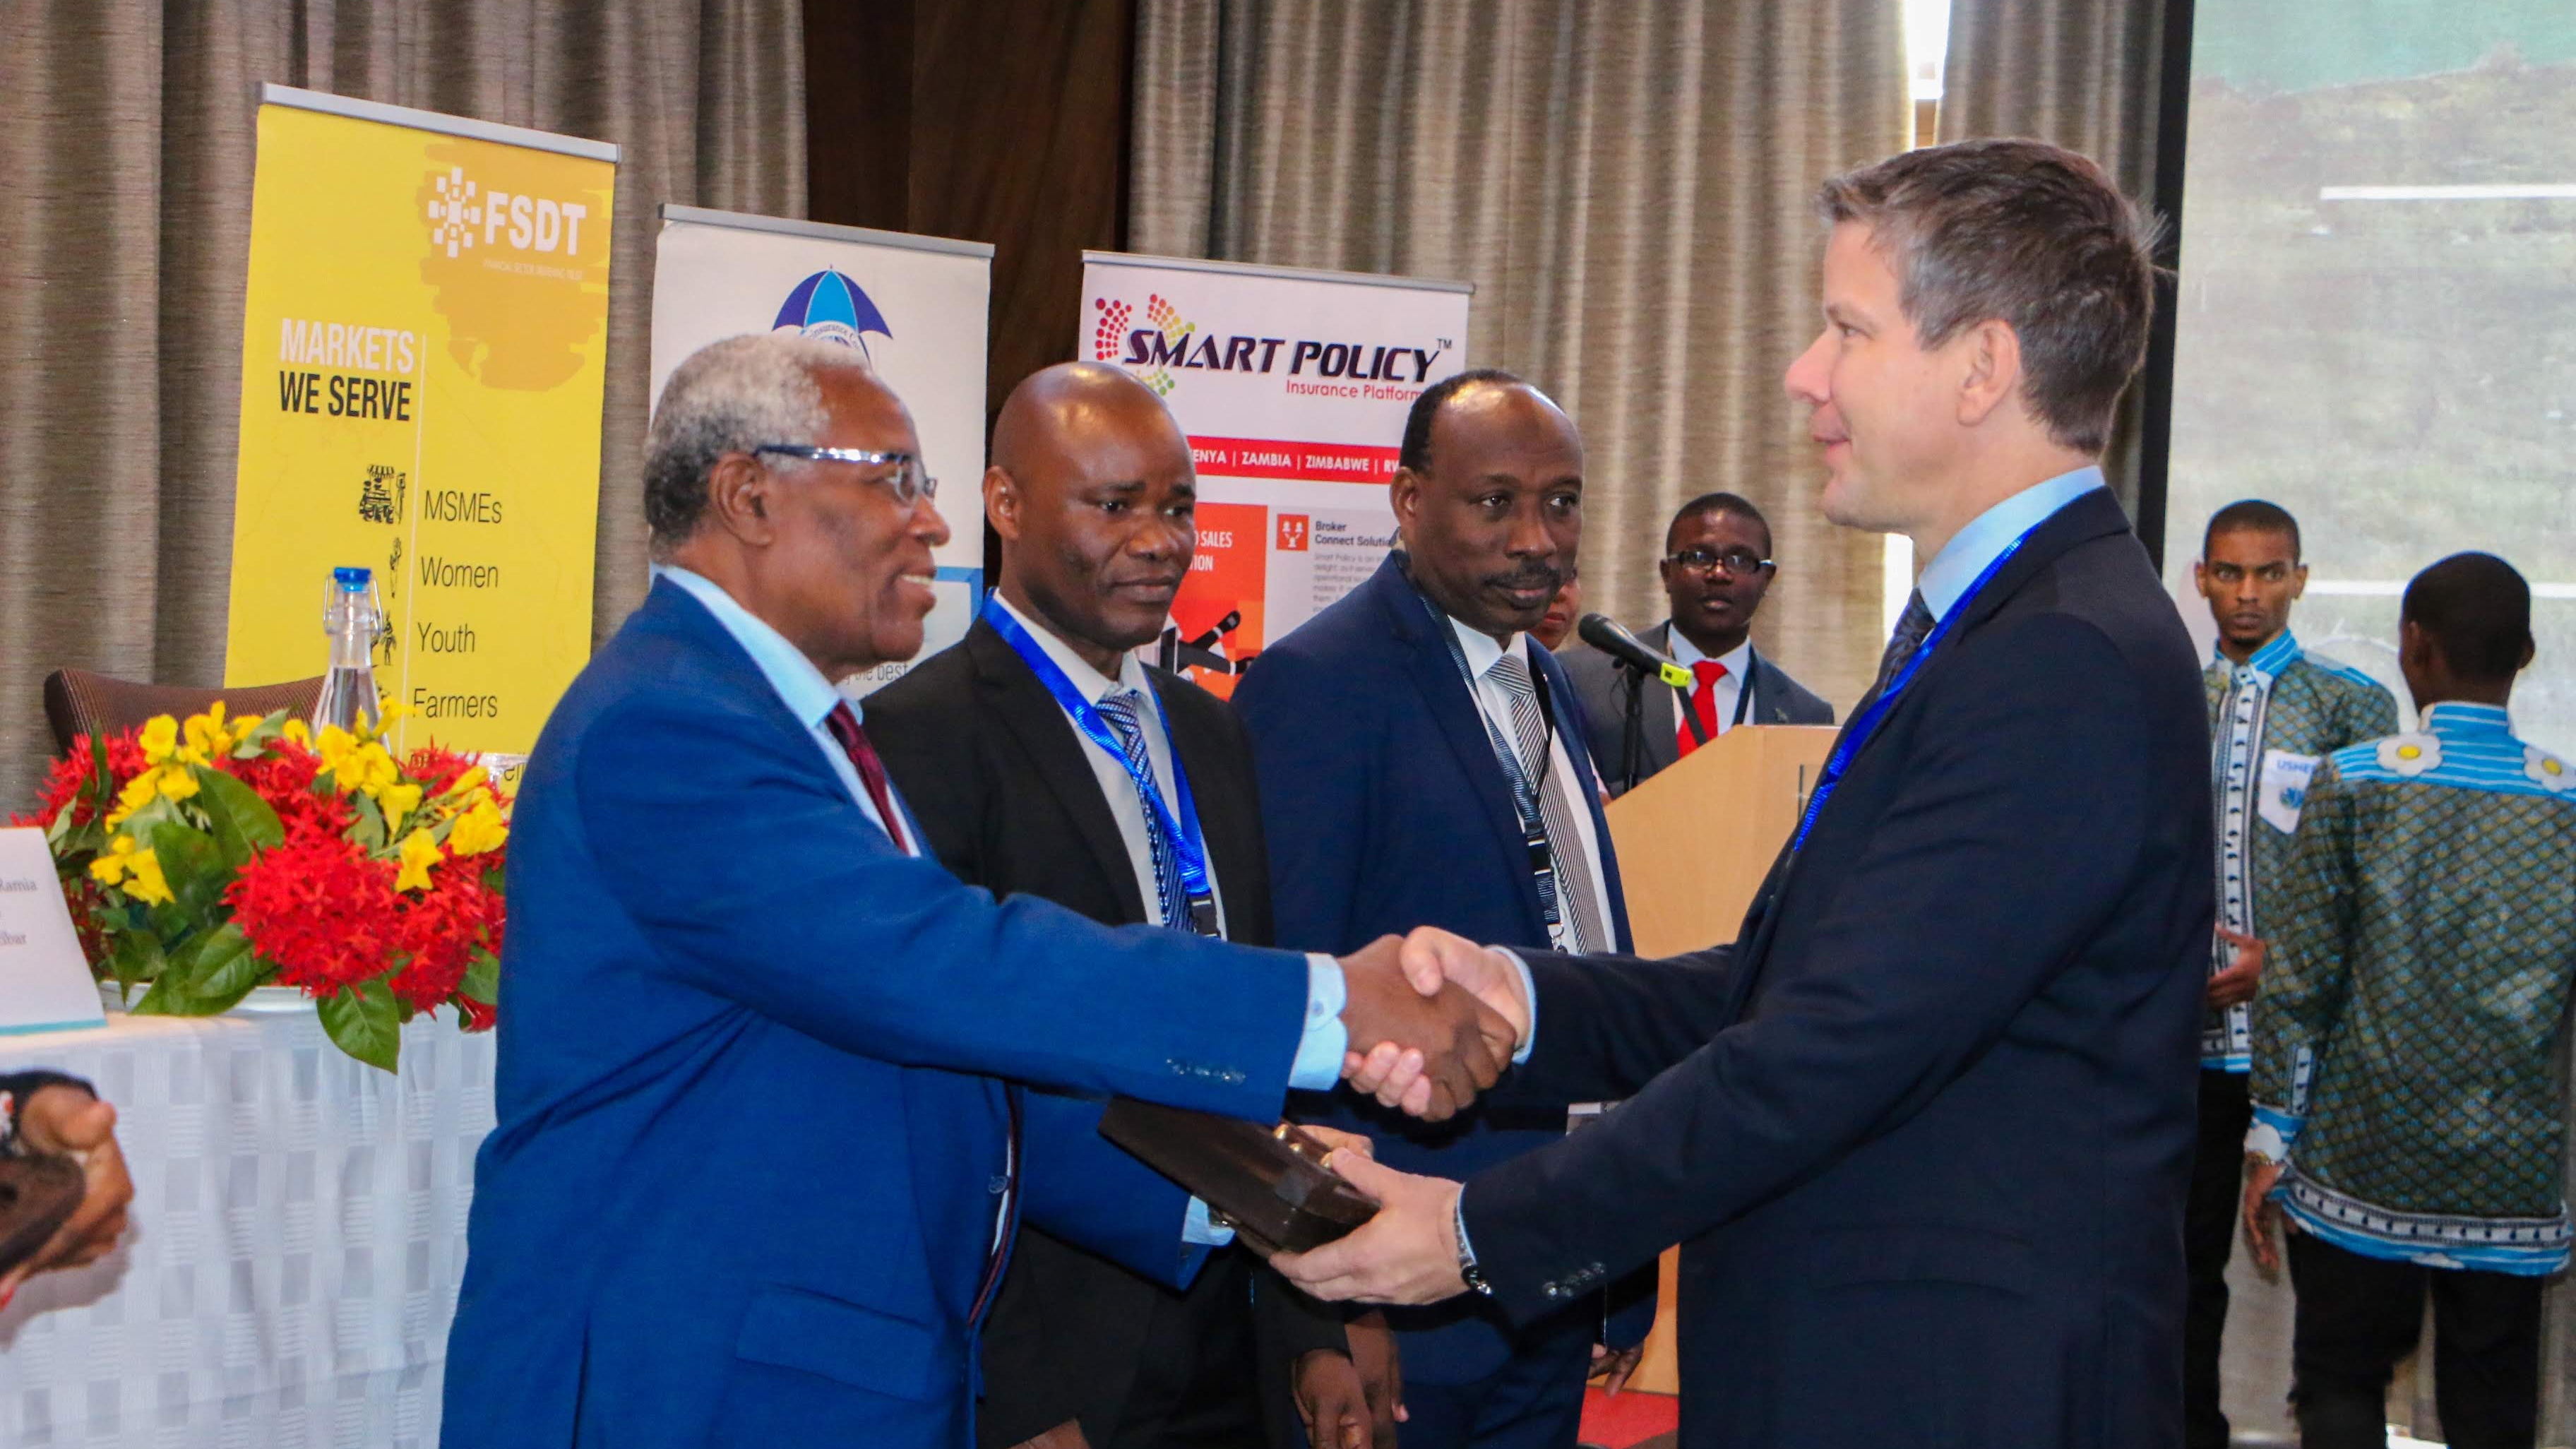 Mohamed Ramia Abdiwawa, Minister of Finance and Planning for Tanzania, welcomes Dirk Reinhard, Vice Chairman of the Munich Re Foundation, Germany. Centre left to right: Dr. Mussa C. Juma, Commissioner of Insurance, Tanzania, and Khamis Suleiman, CEO of Sanlam Life Insurance and Chair of the Organising Committee for the conference, Tanzania.